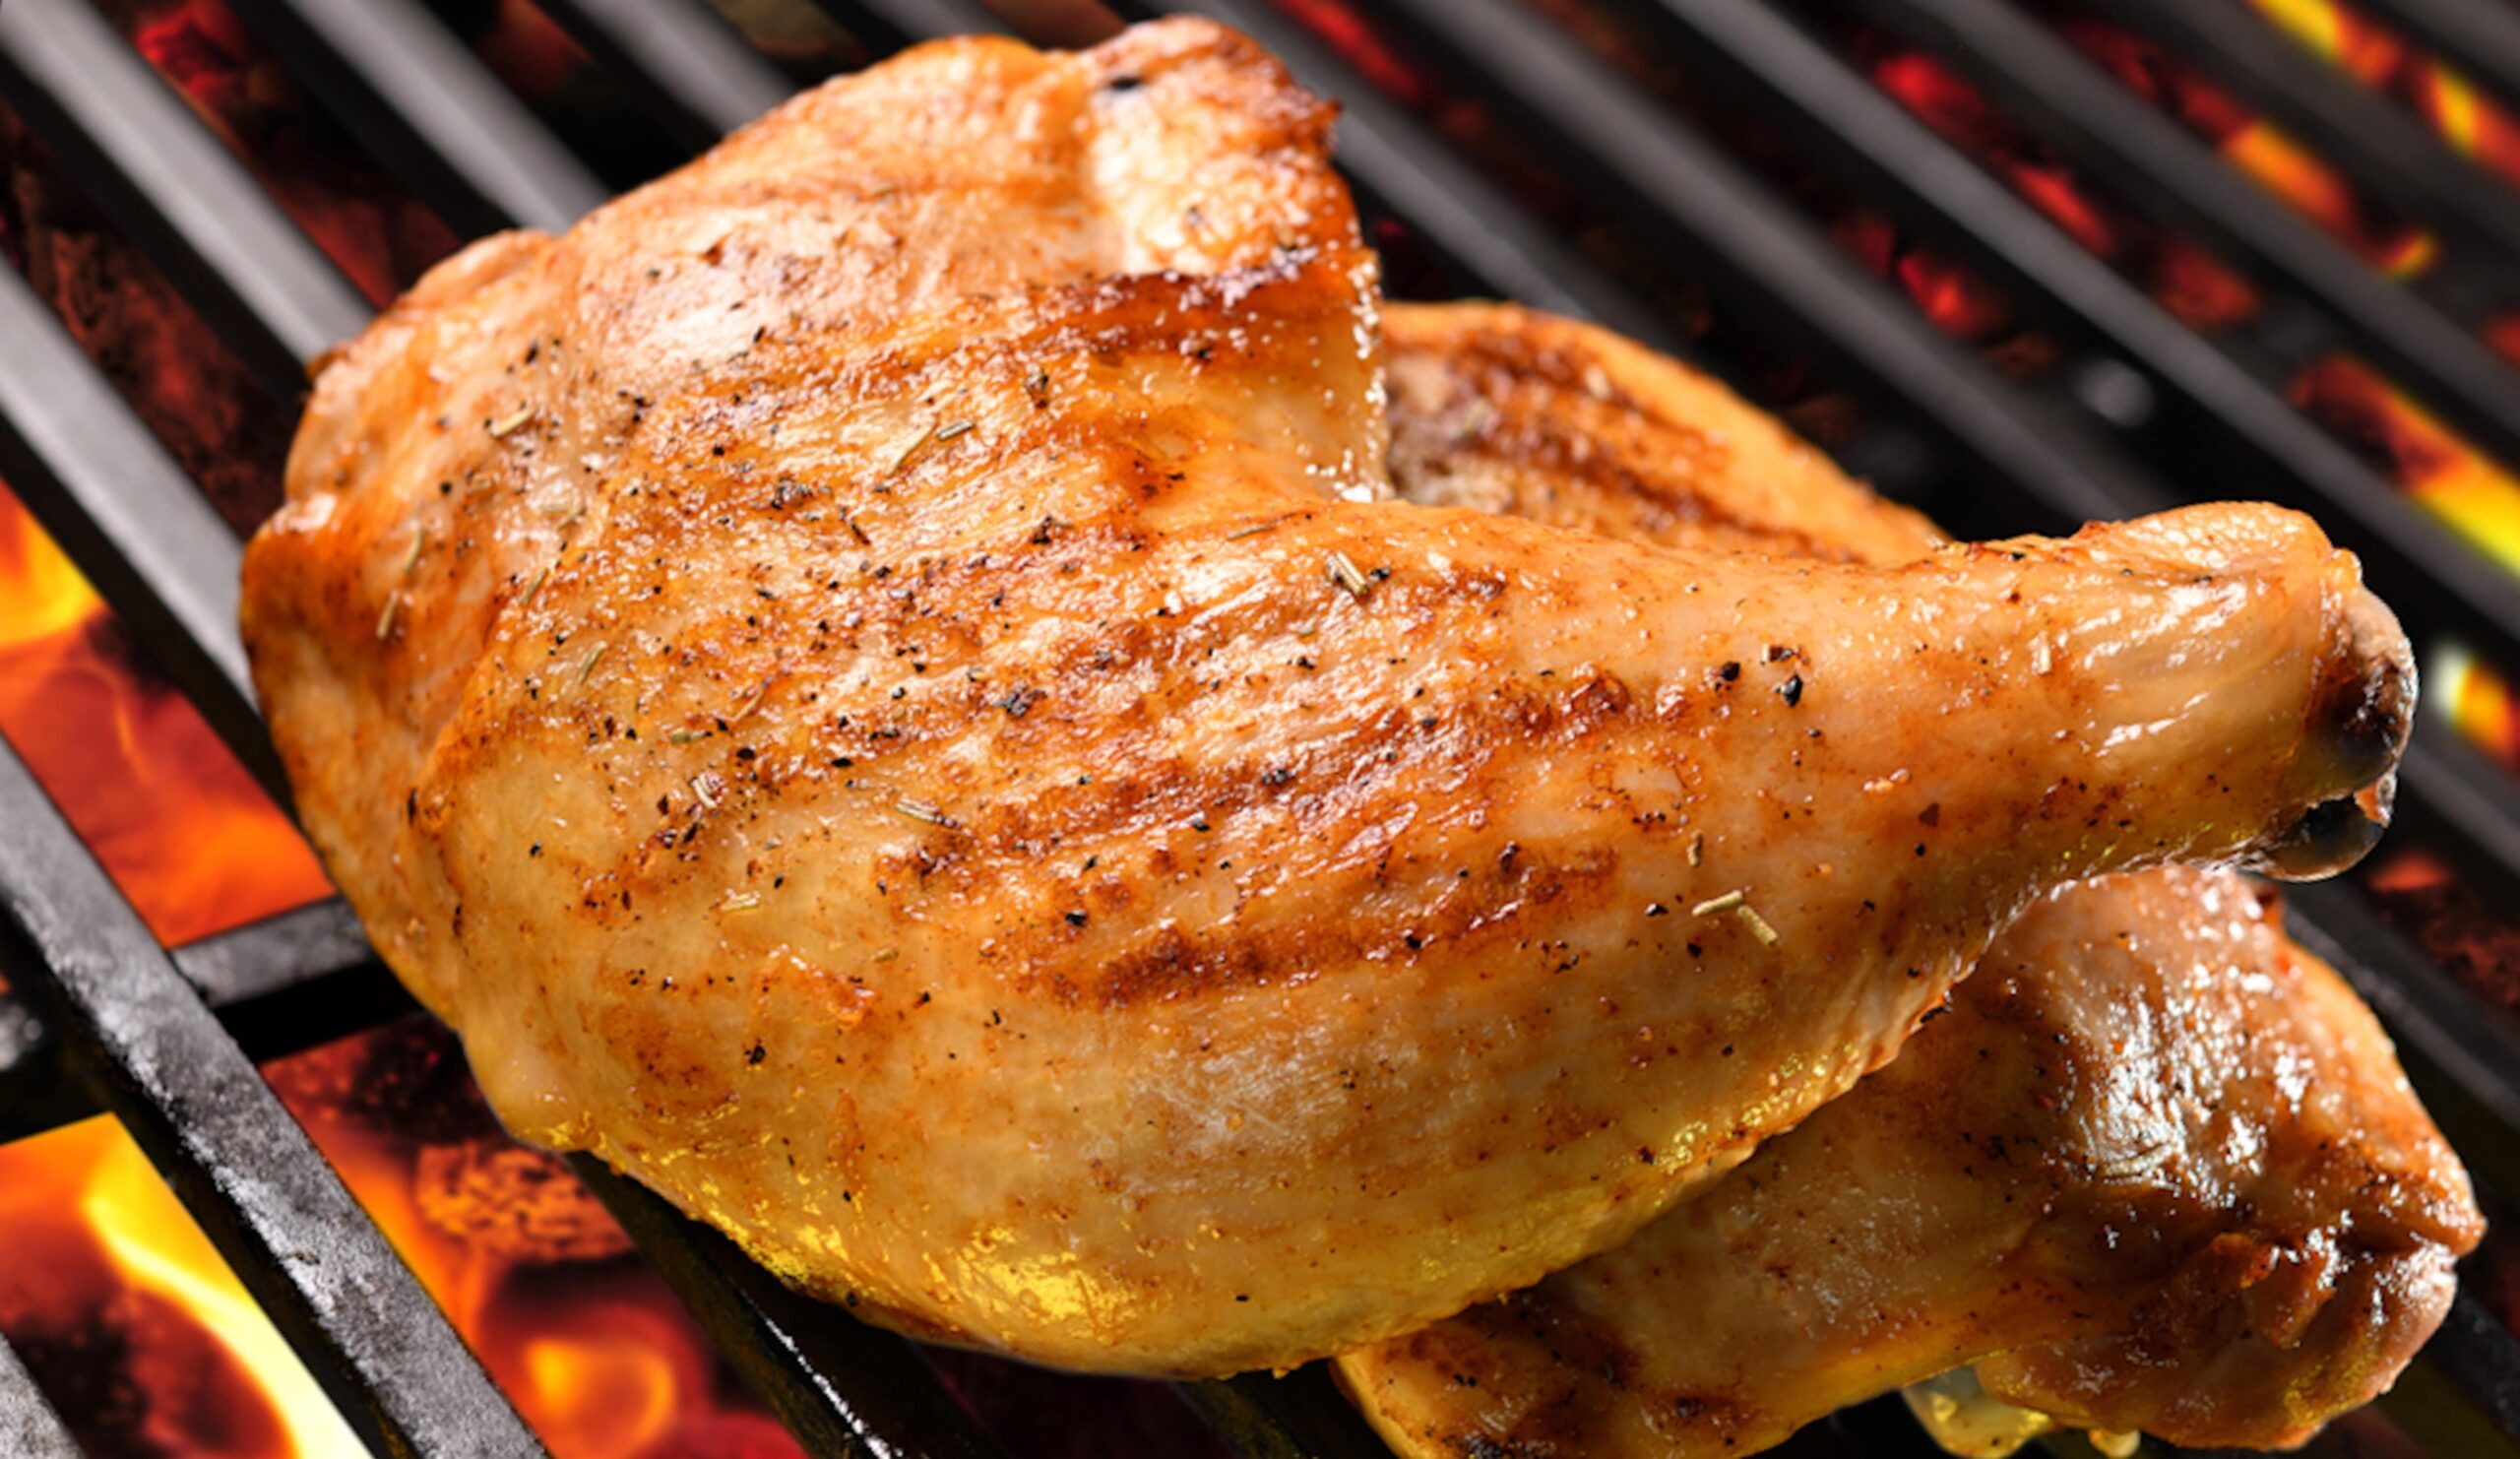 A glistening piece of seasoned chicked being barbecued.